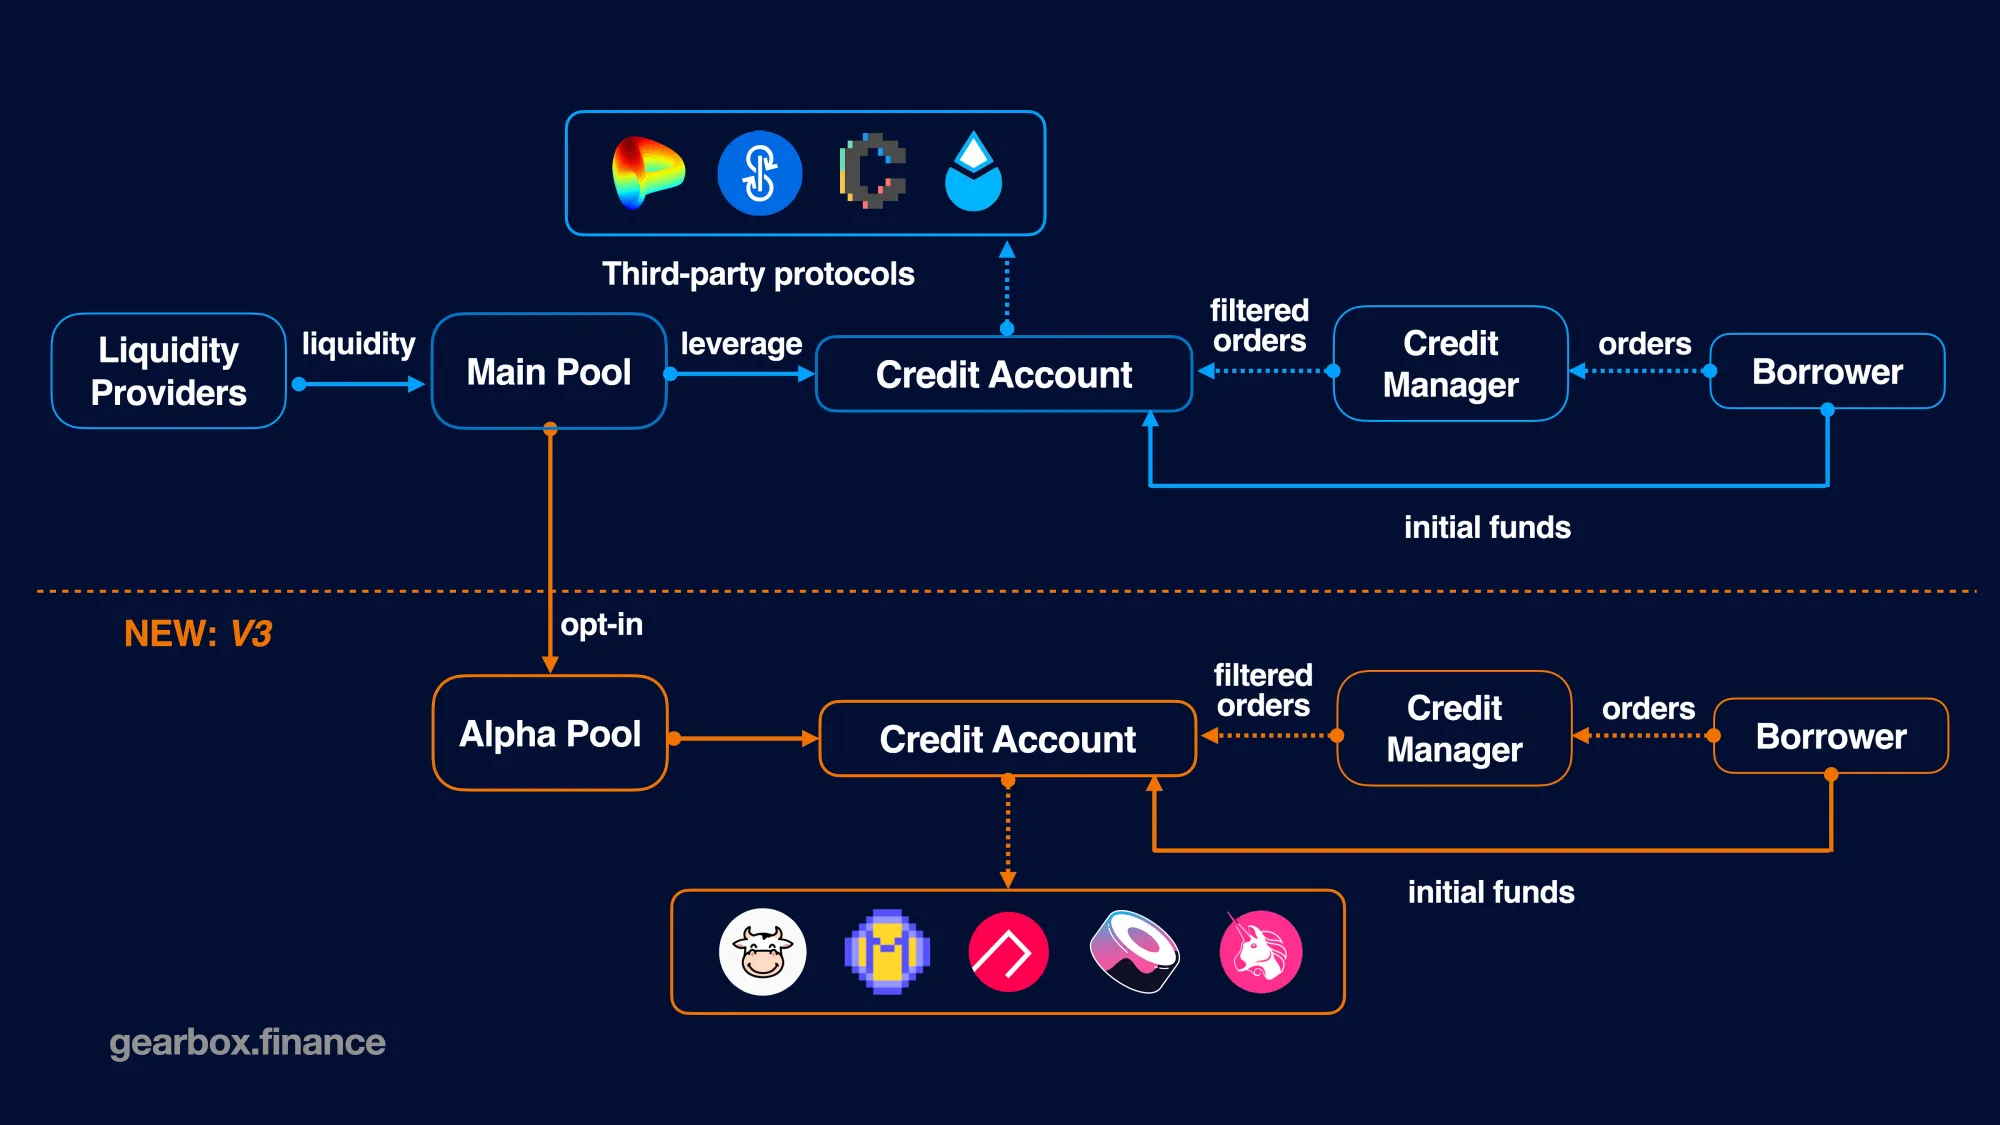 Gearbox Protocol V3: The Onchain Credit Layer